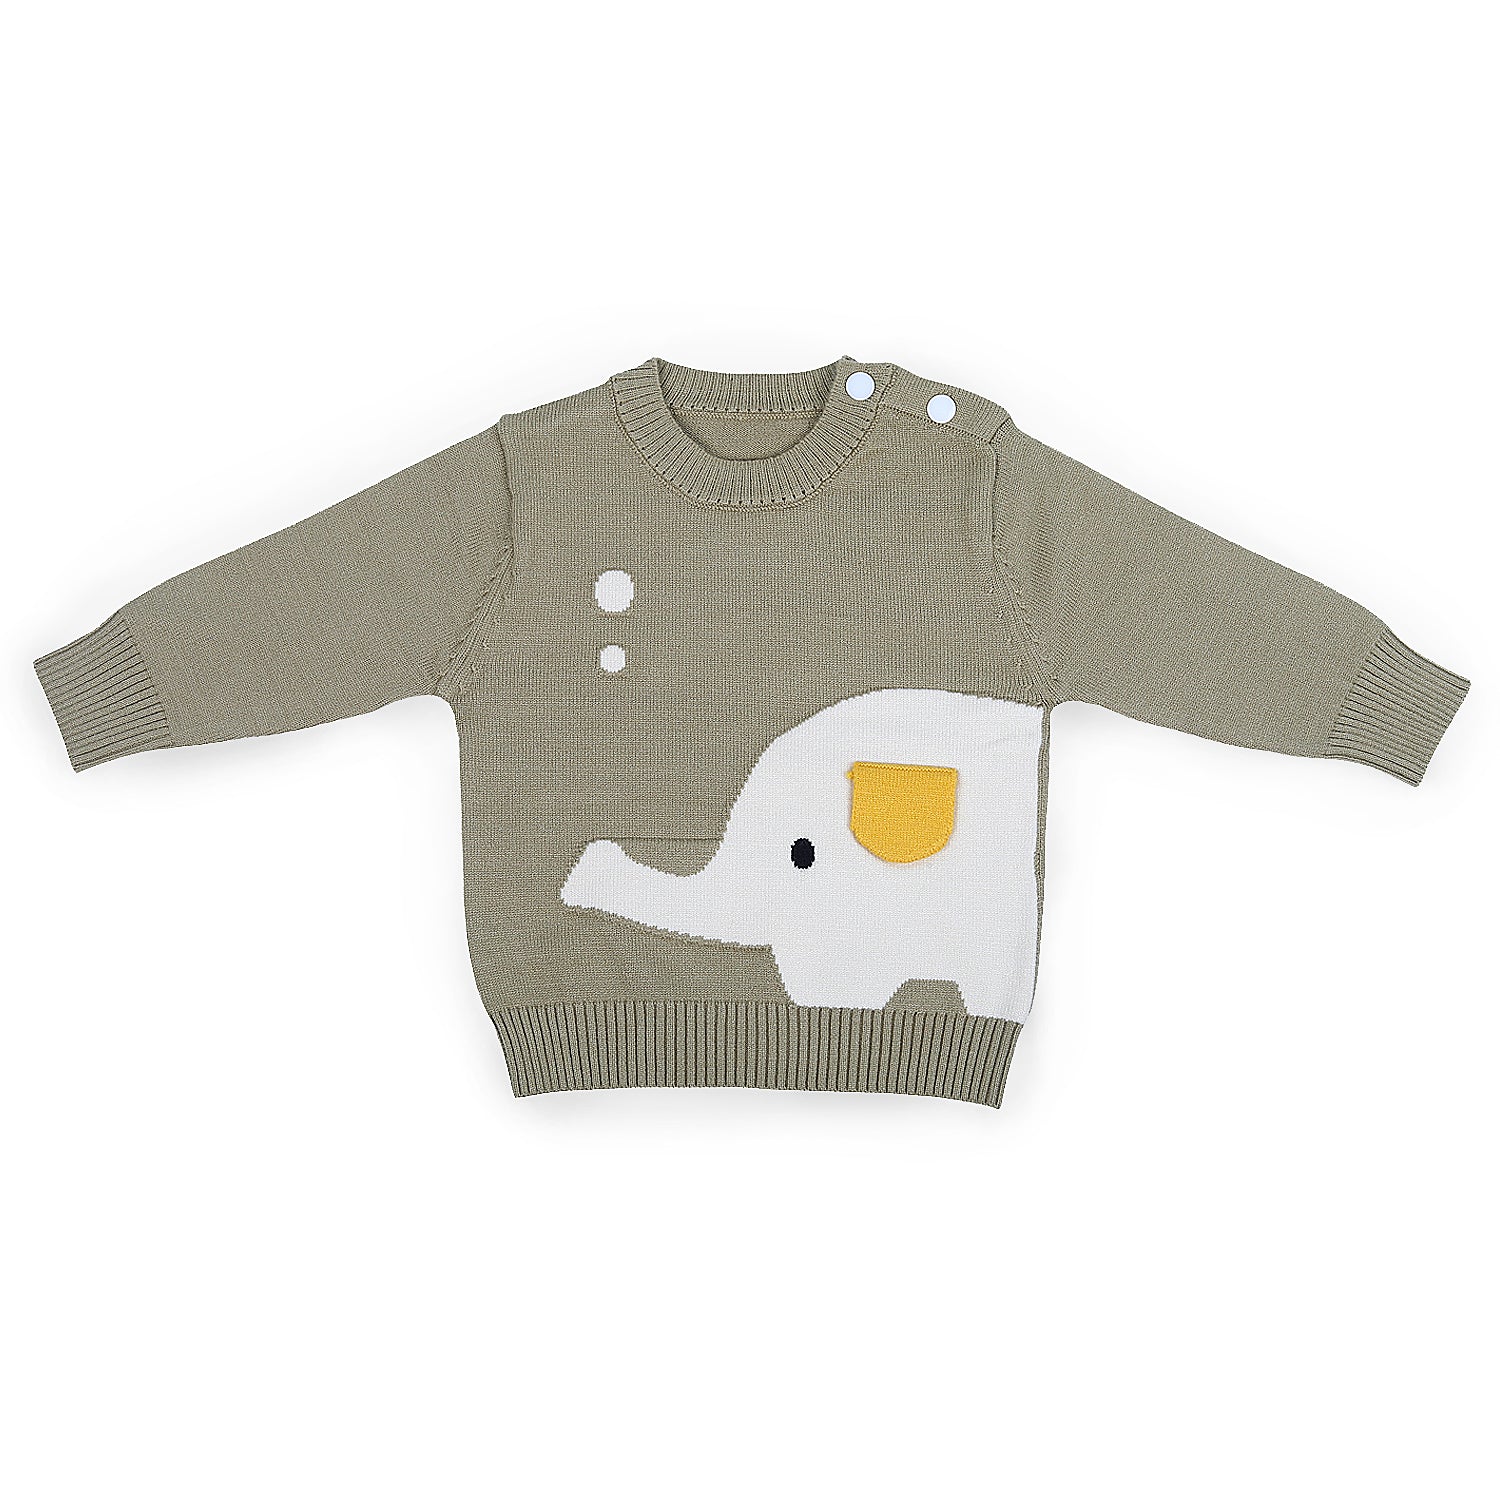 Elephant With 3D Ear Premium Full Sleeves Knitted Sweater - Olive Green - Baby Moo